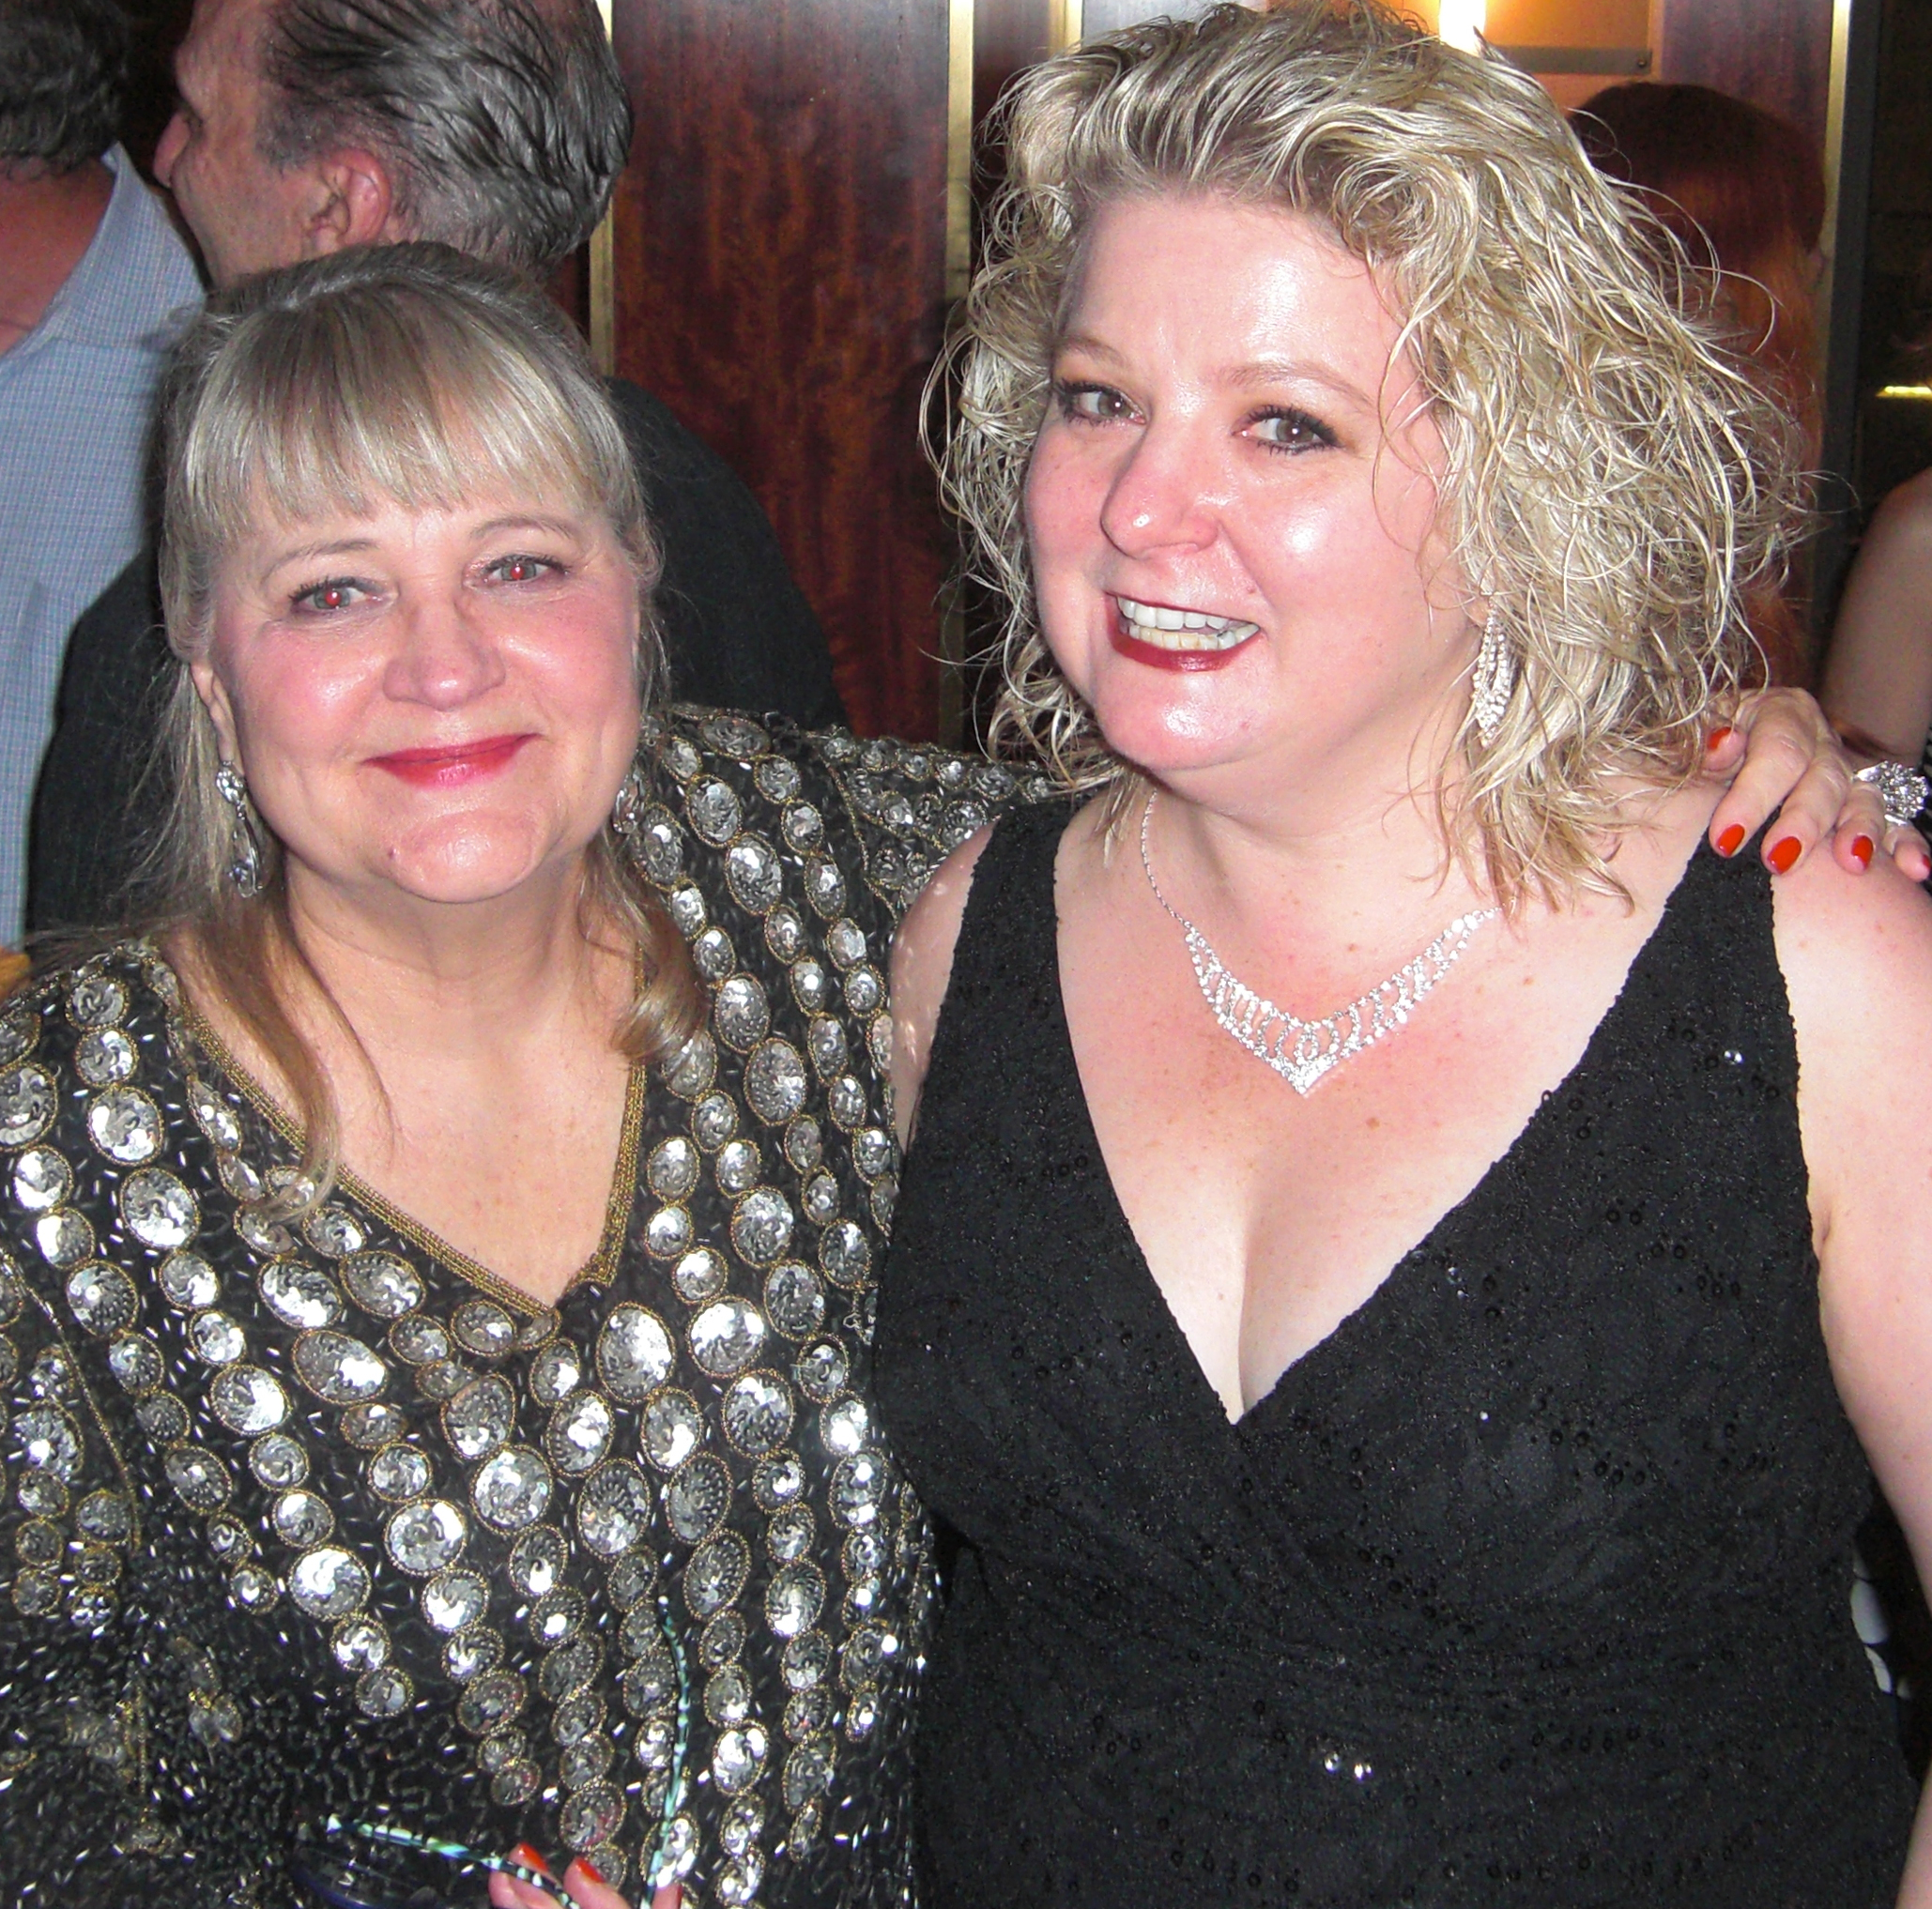 Tanya Moberly with Debbi at the meet and greet after the show